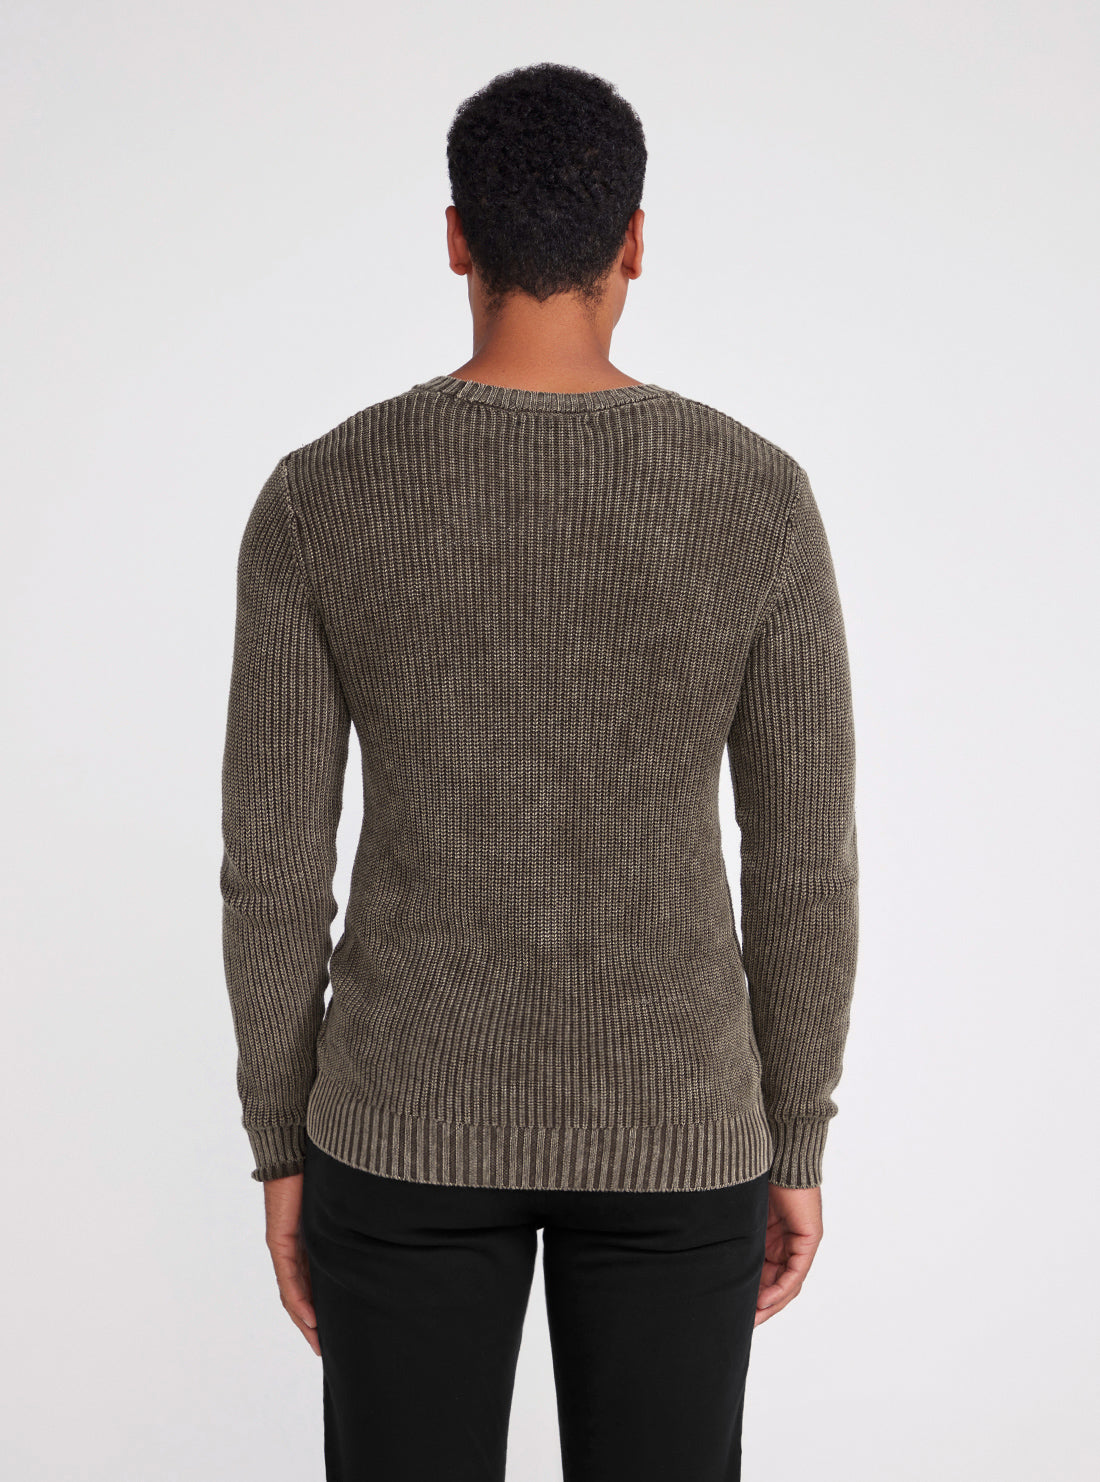 Espresso Brown Angus Knit Jumper | GUESS Men's Apparel | back view